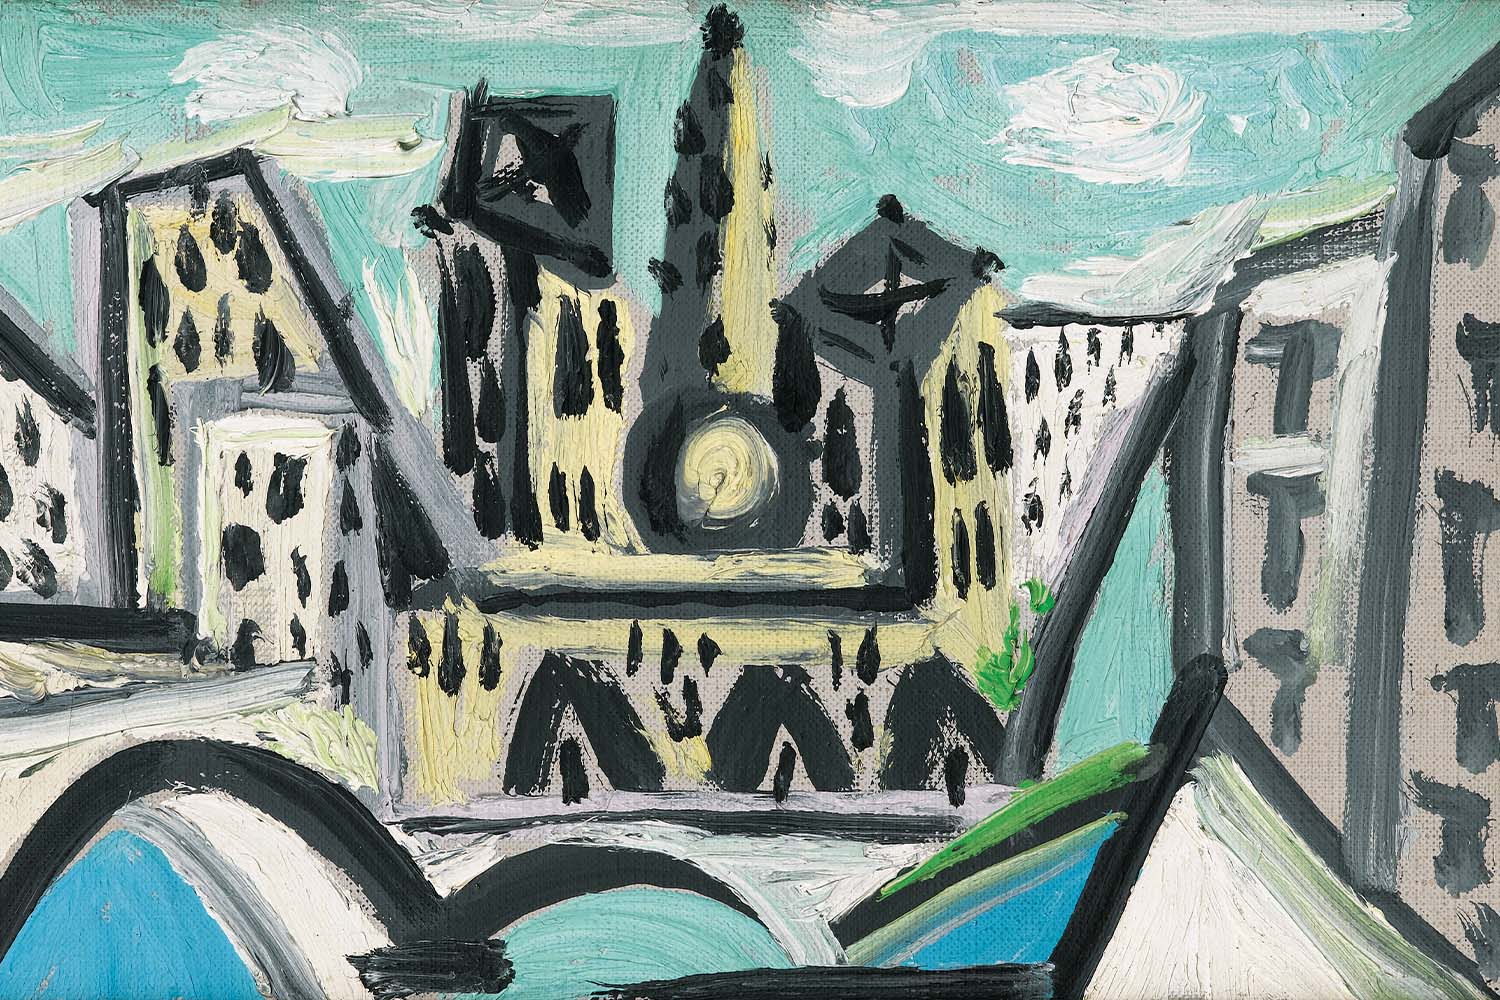 Pablo Picasso's "View of Notre-Dame"